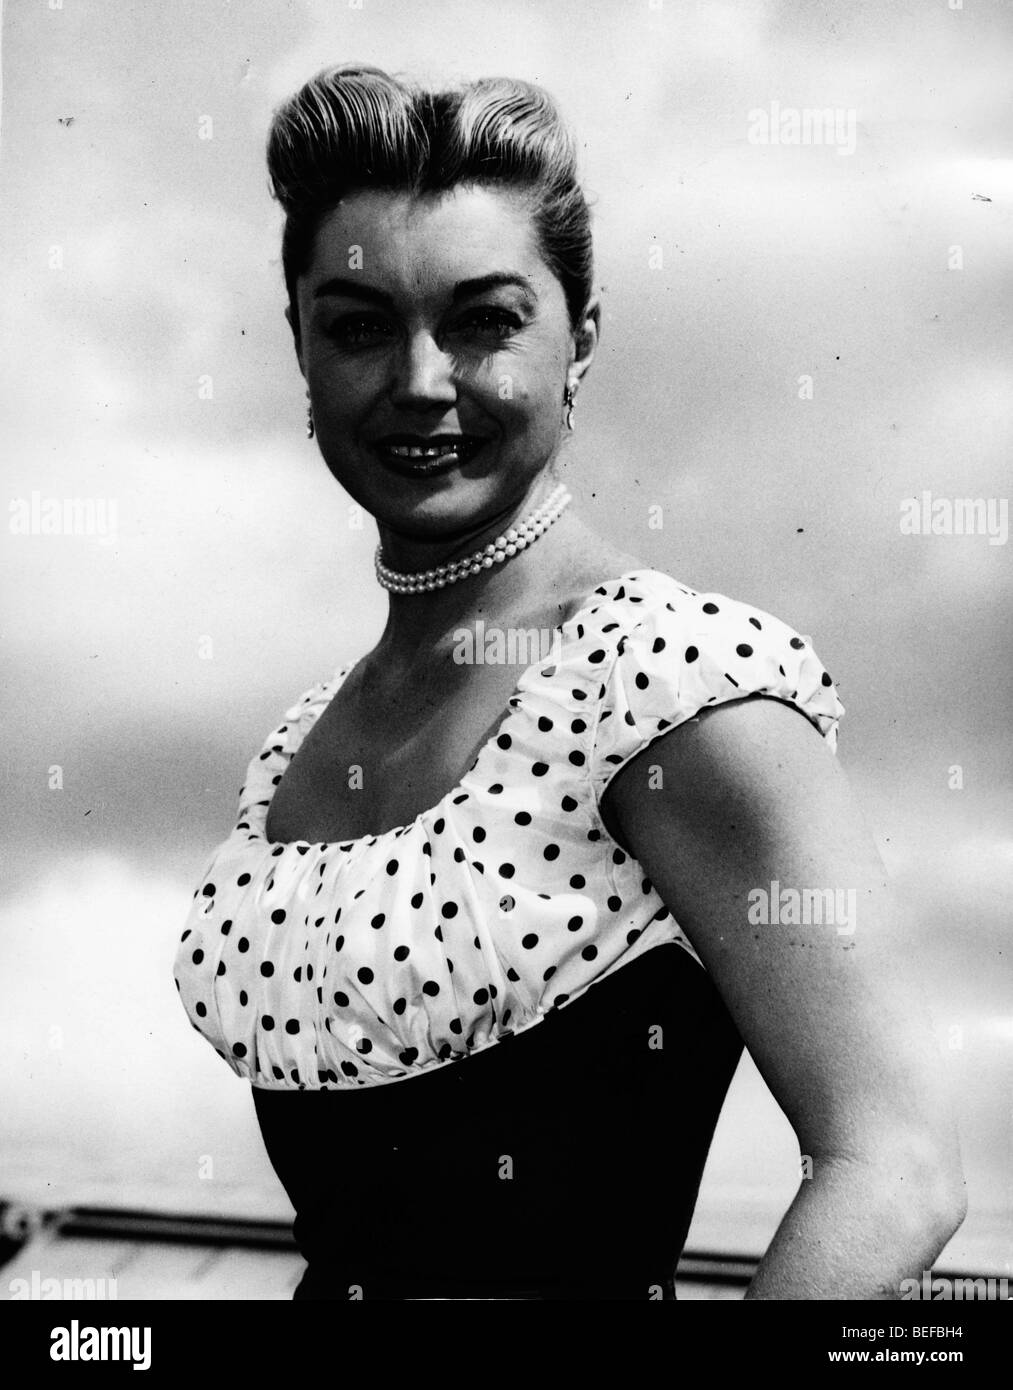 Esther jane williams Black and White Stock Photos & Images - Alamy